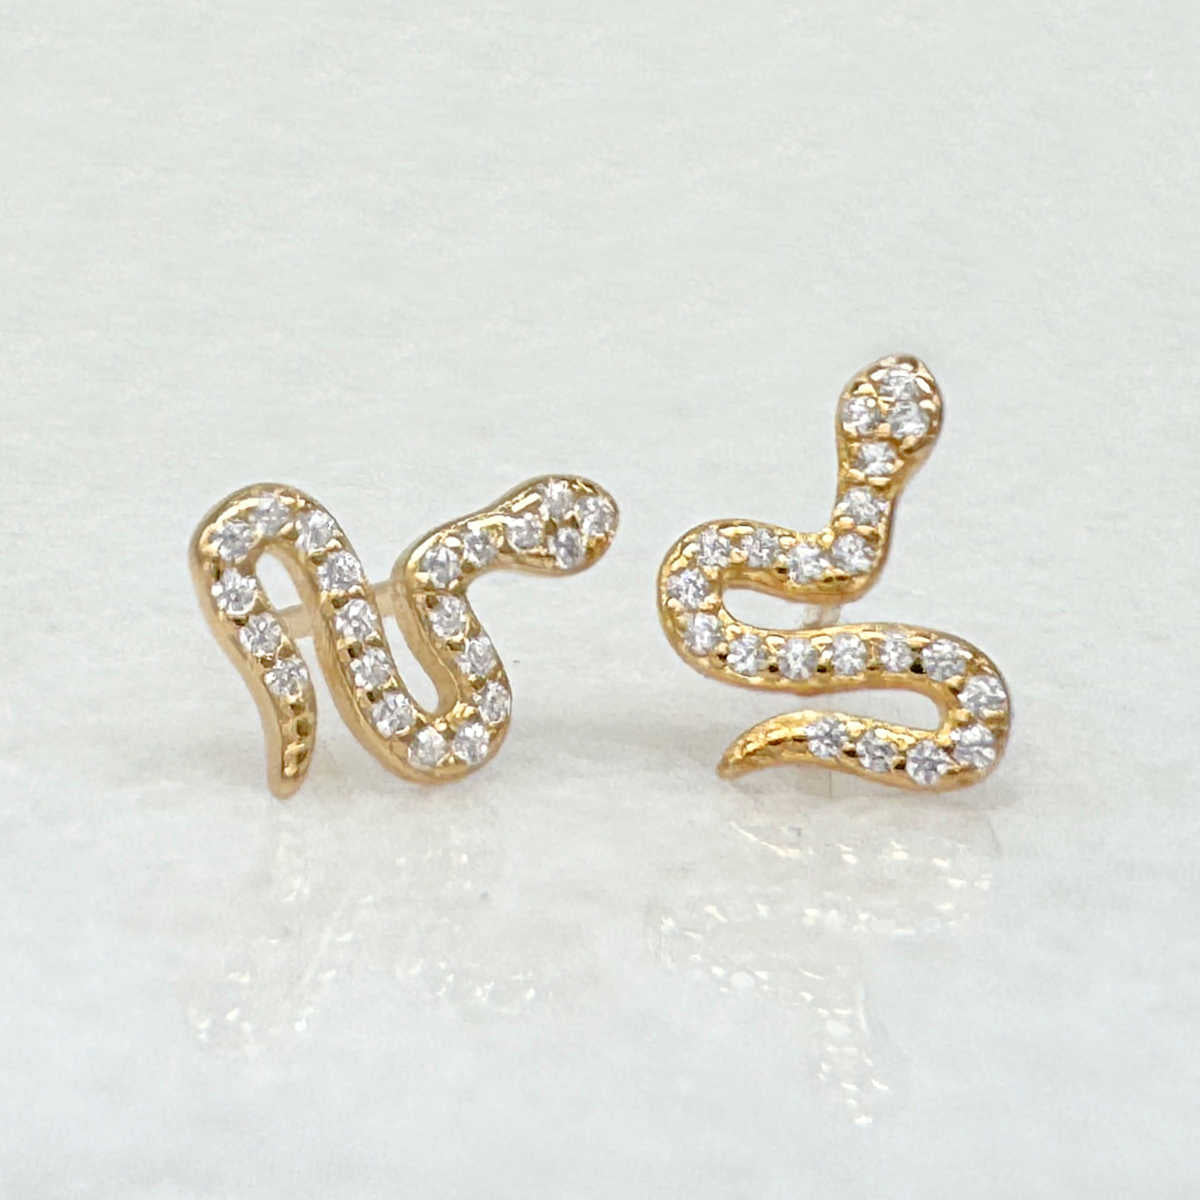 Snake Stud Earrings with Gemstones, 18k Gold & Sterling Silver Jewelry from Two of Most